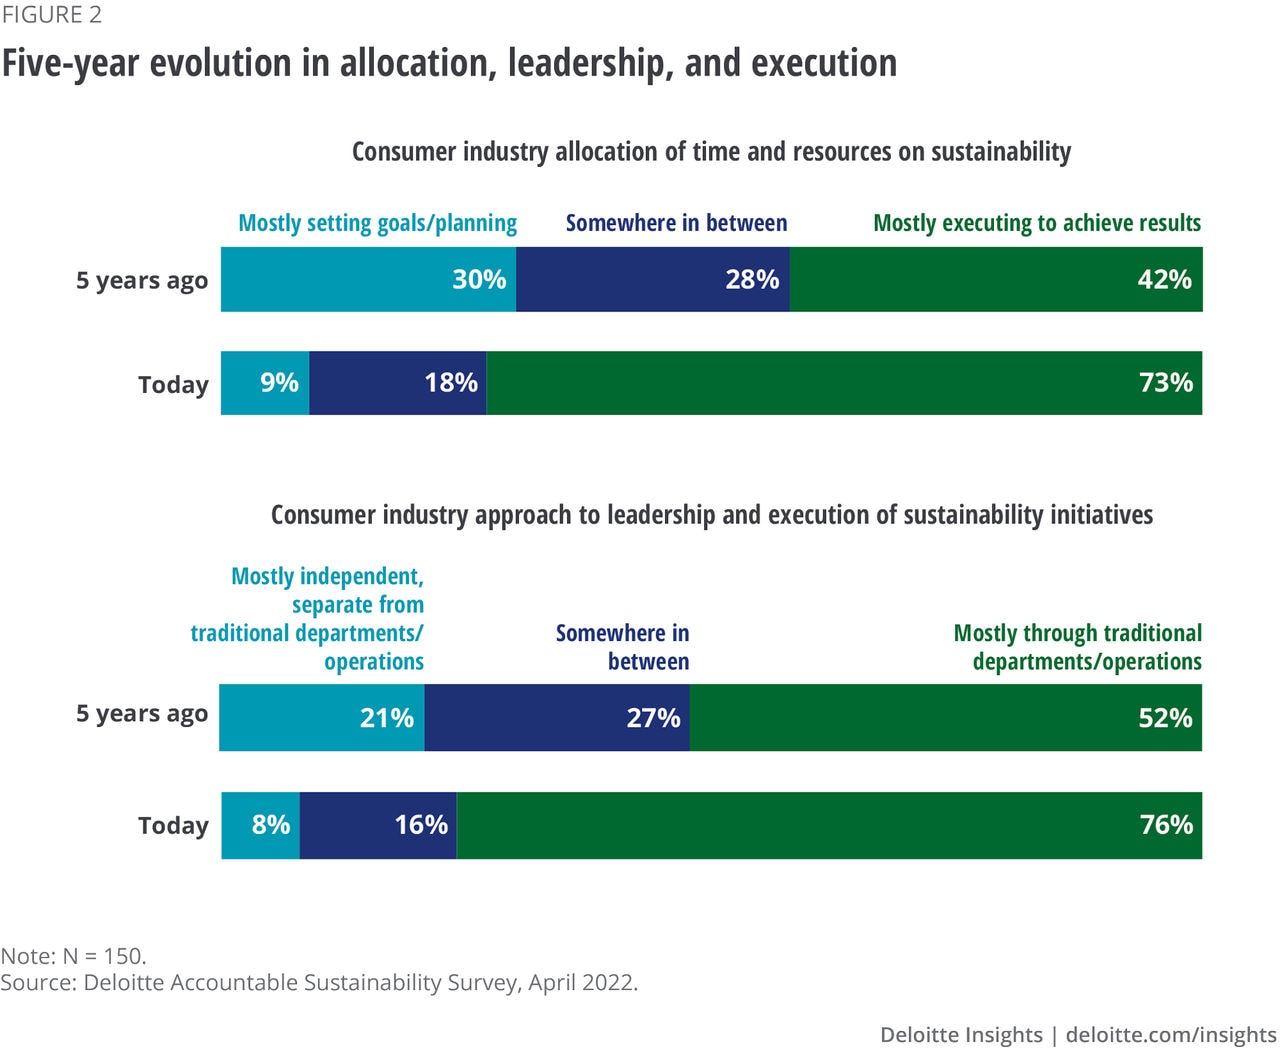 Figure 2. Five-year evolution in allocation, leadership, and execution